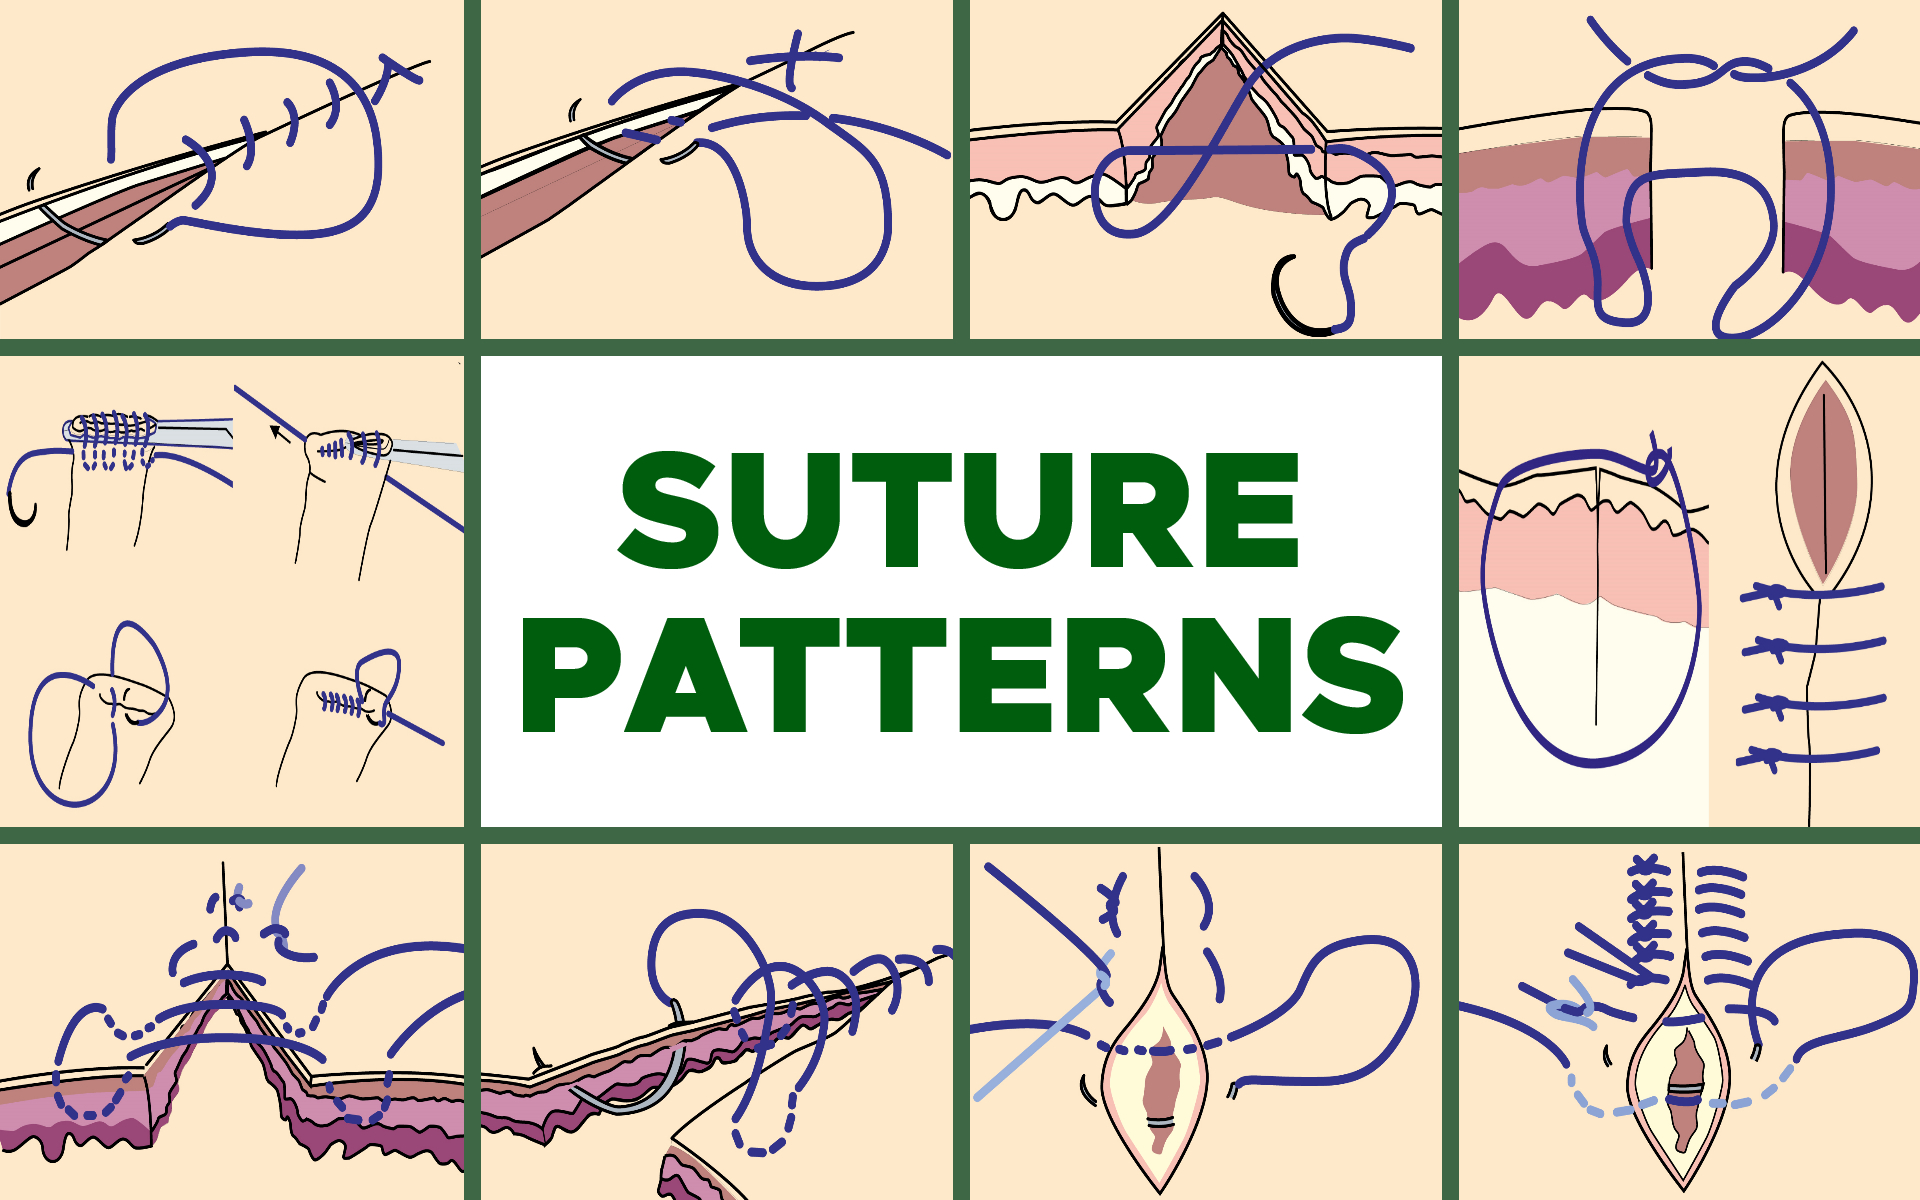 Common Suture Patterns: Interrupted, Continuous, Appositional, Inverting, Tension and Others